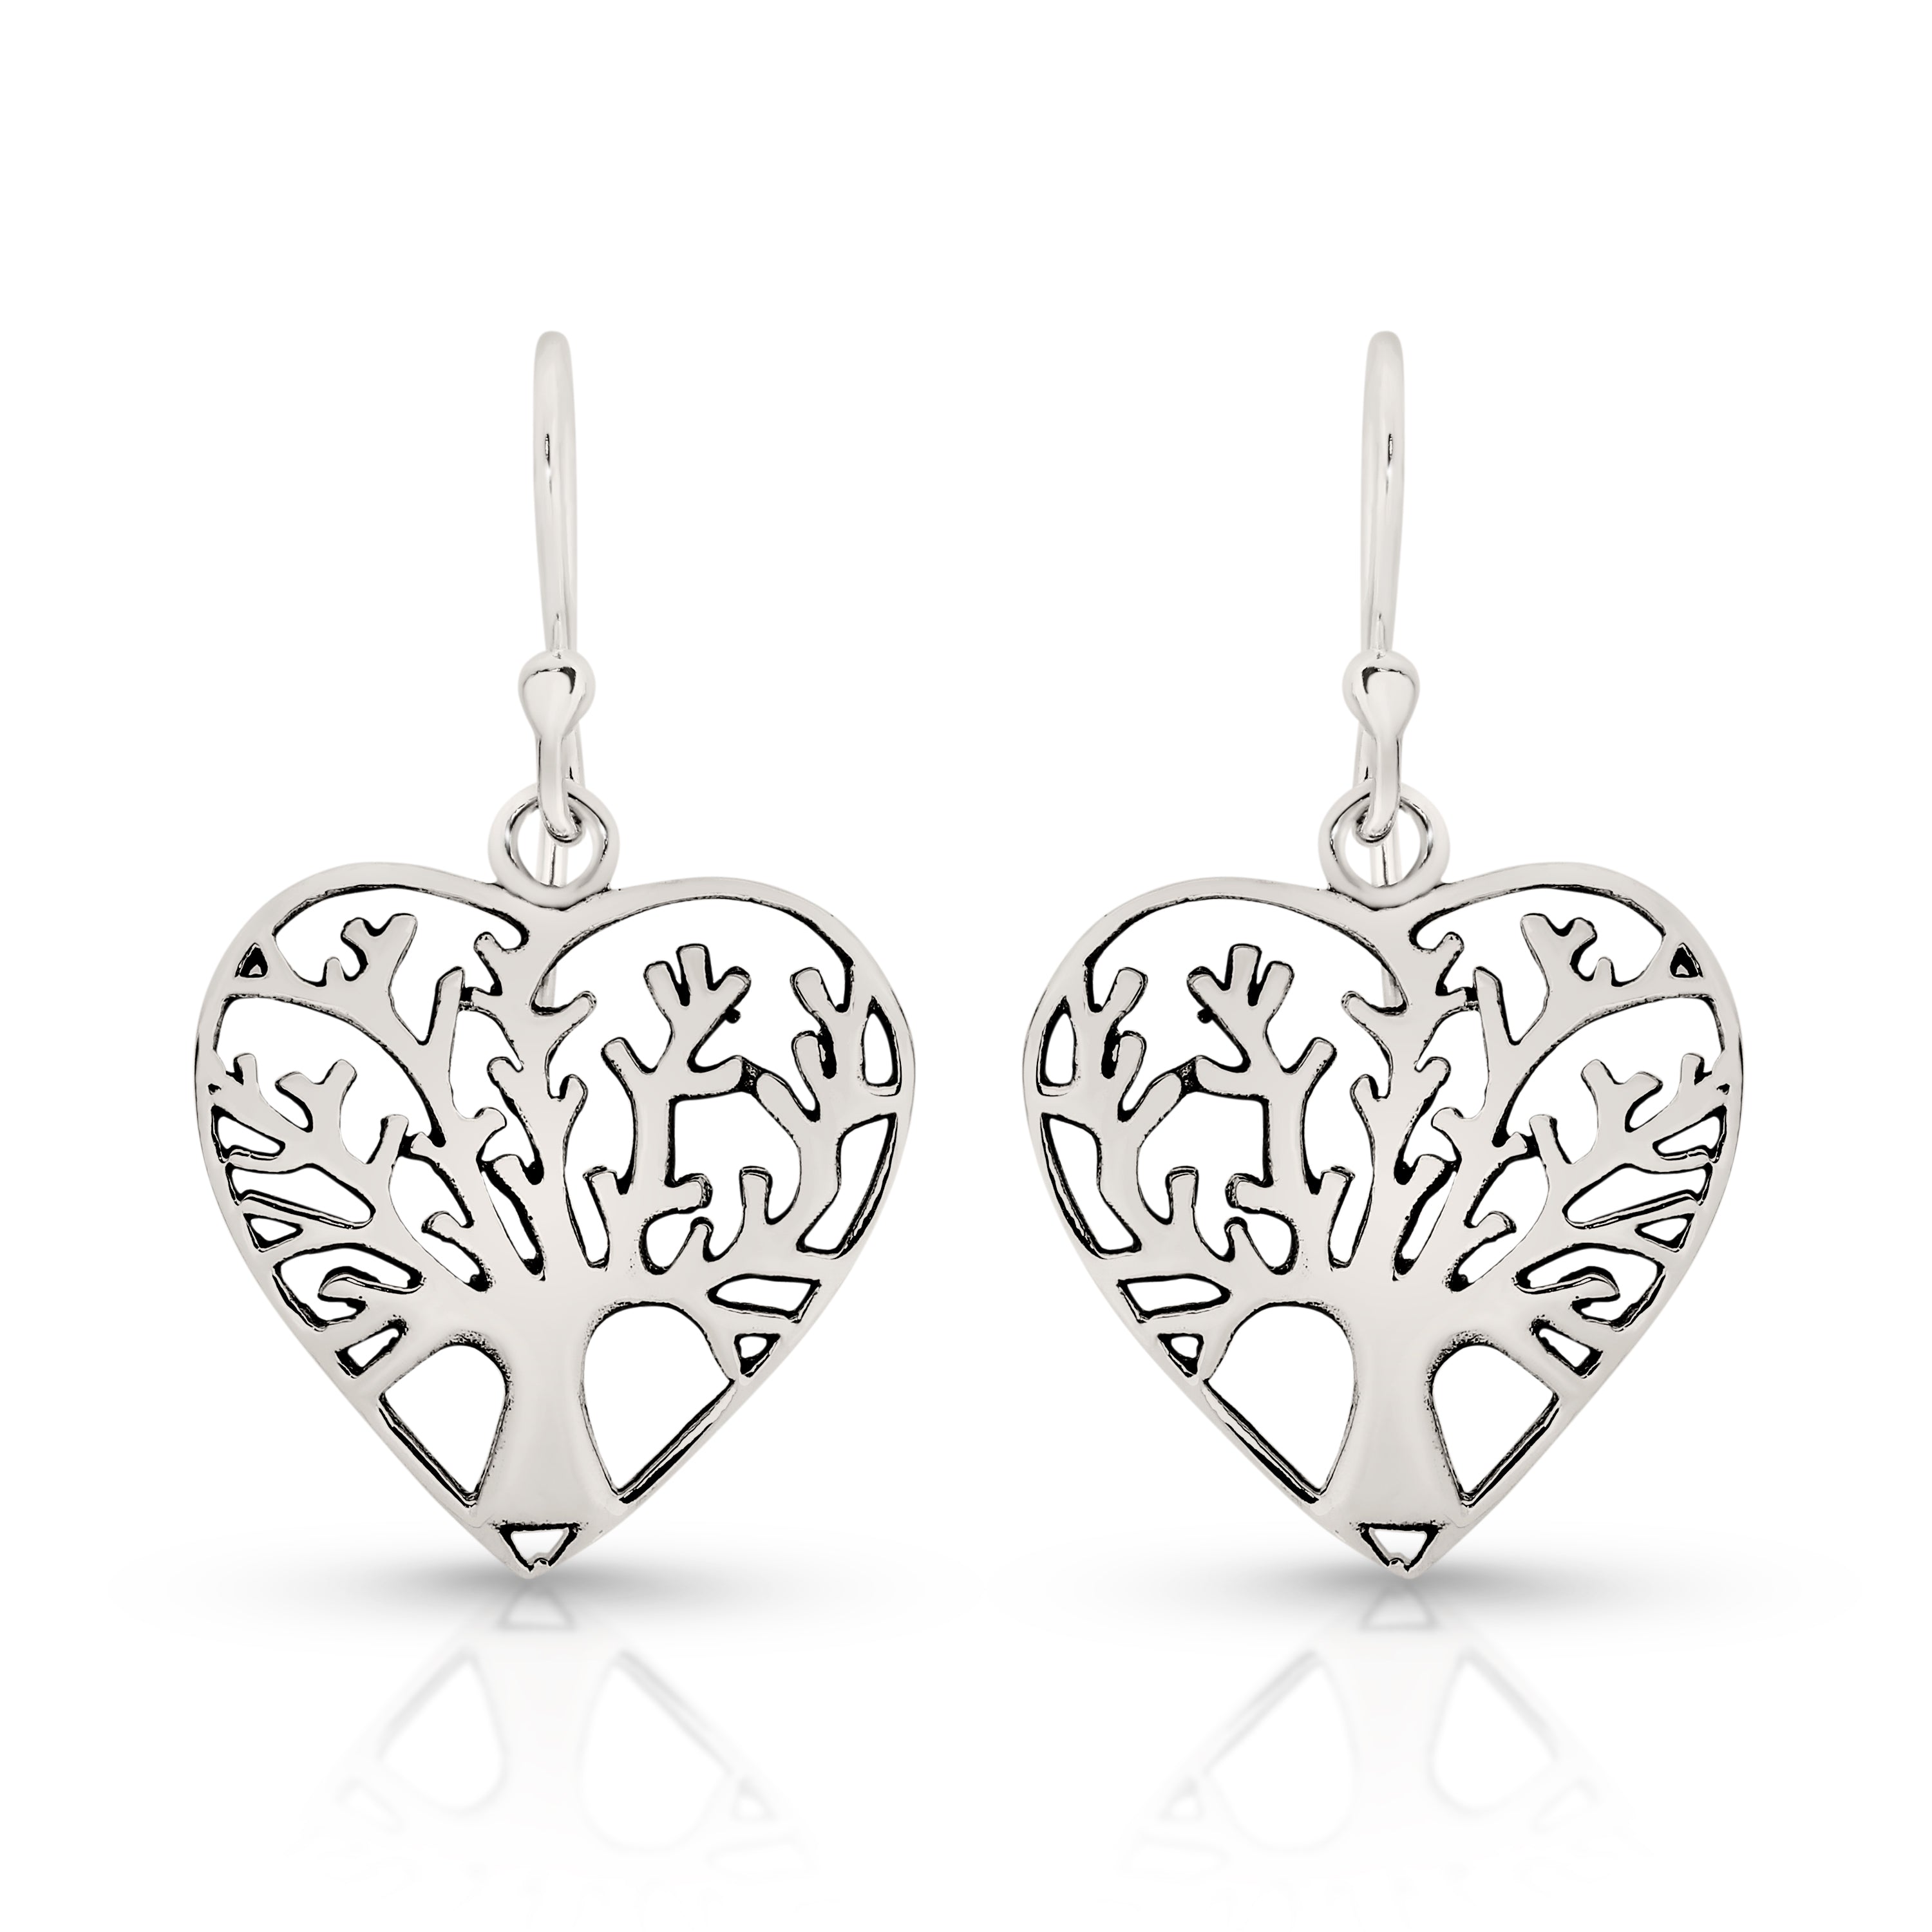 Silver heart tree of lifedrops